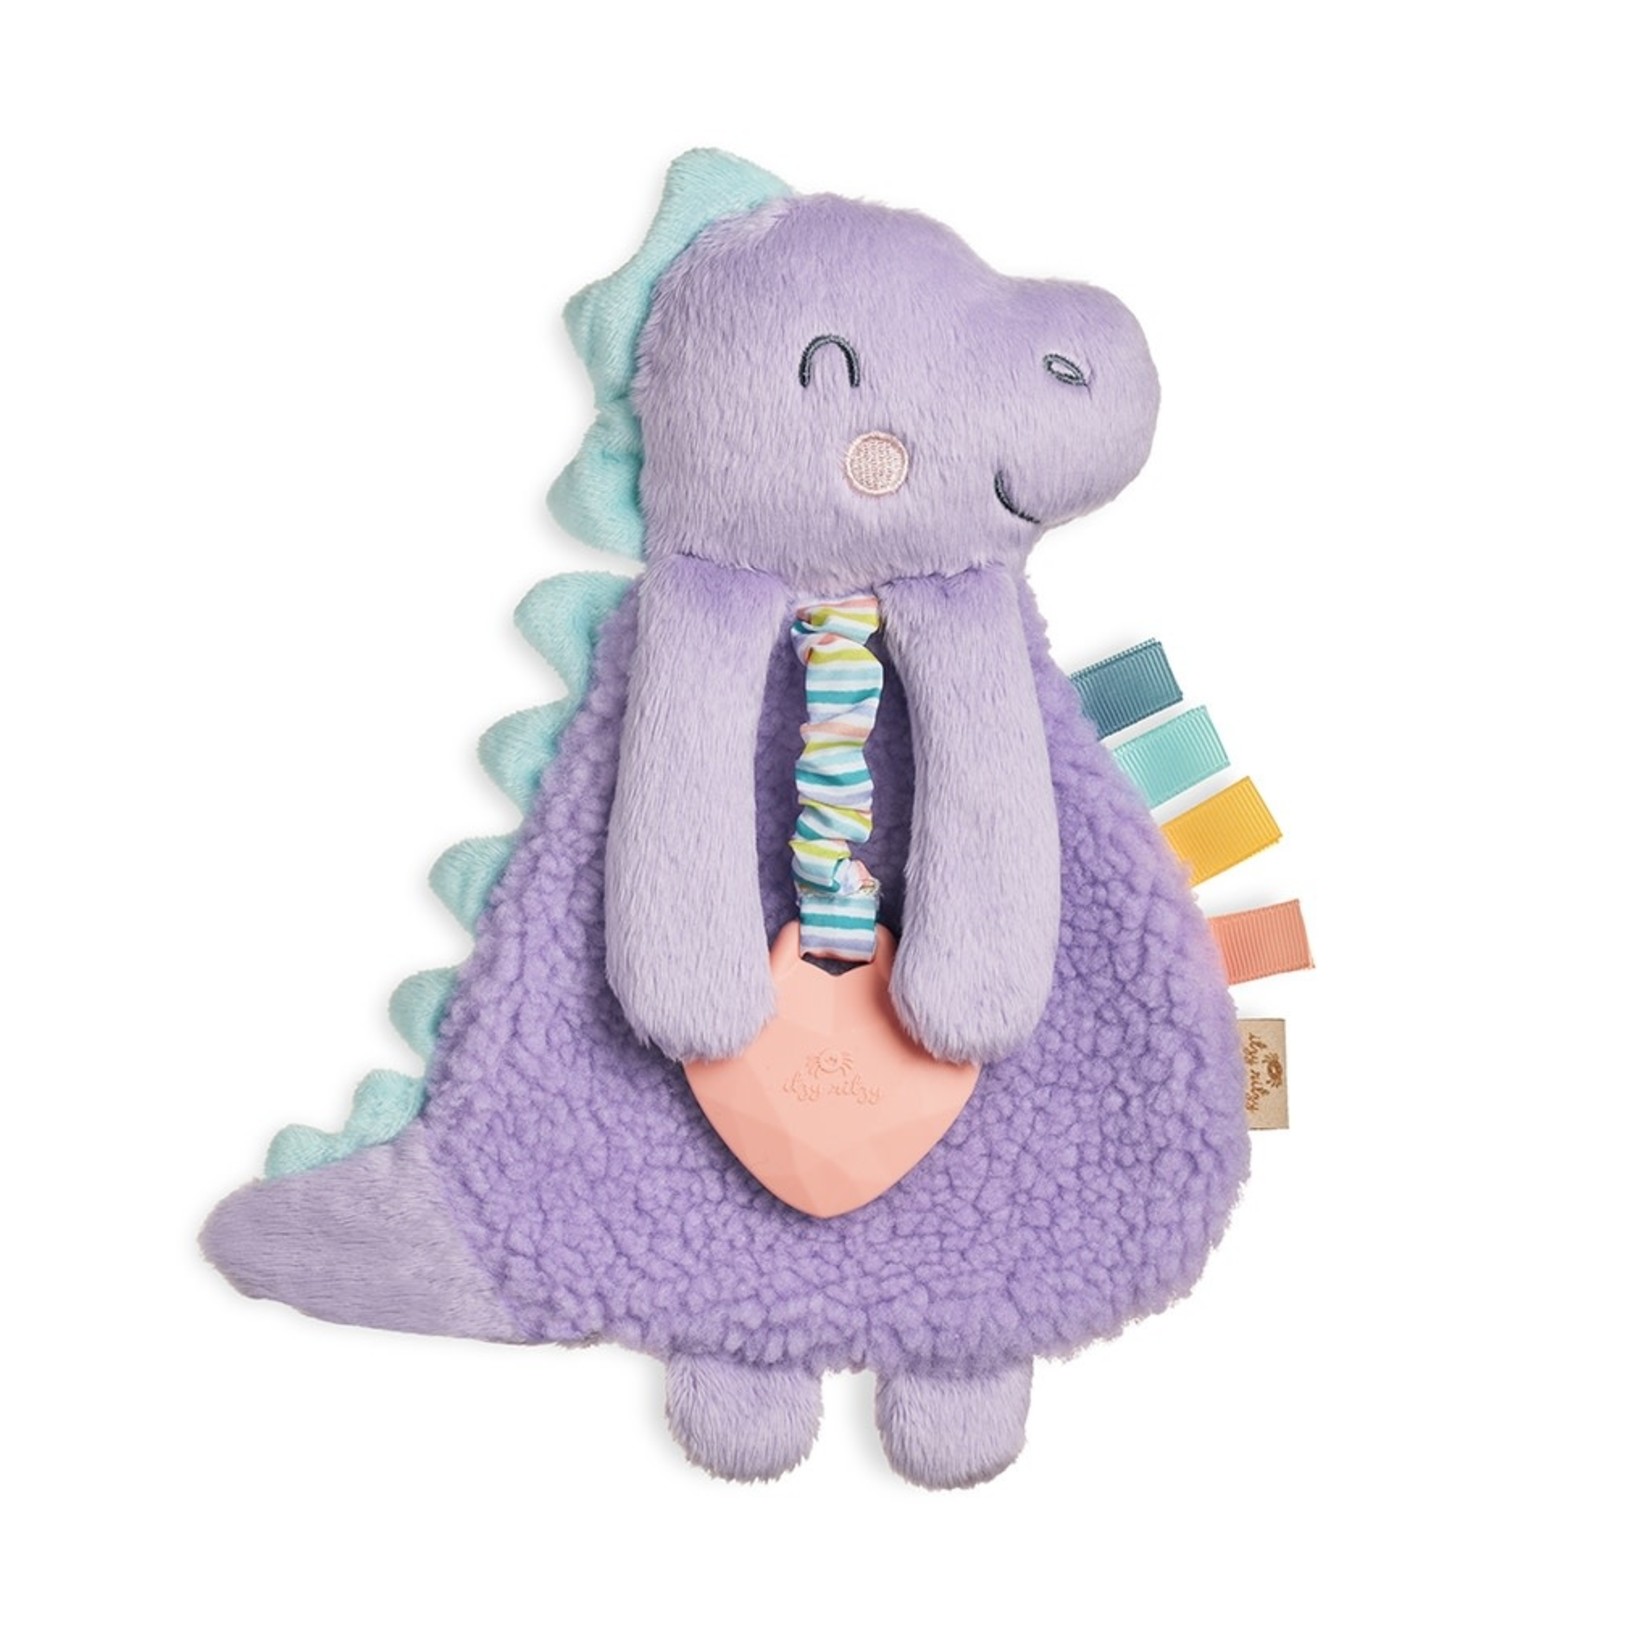 Itzy Ritzy Itzy Lovey Dempsey the Dino Plush with Silicone Teether Toy